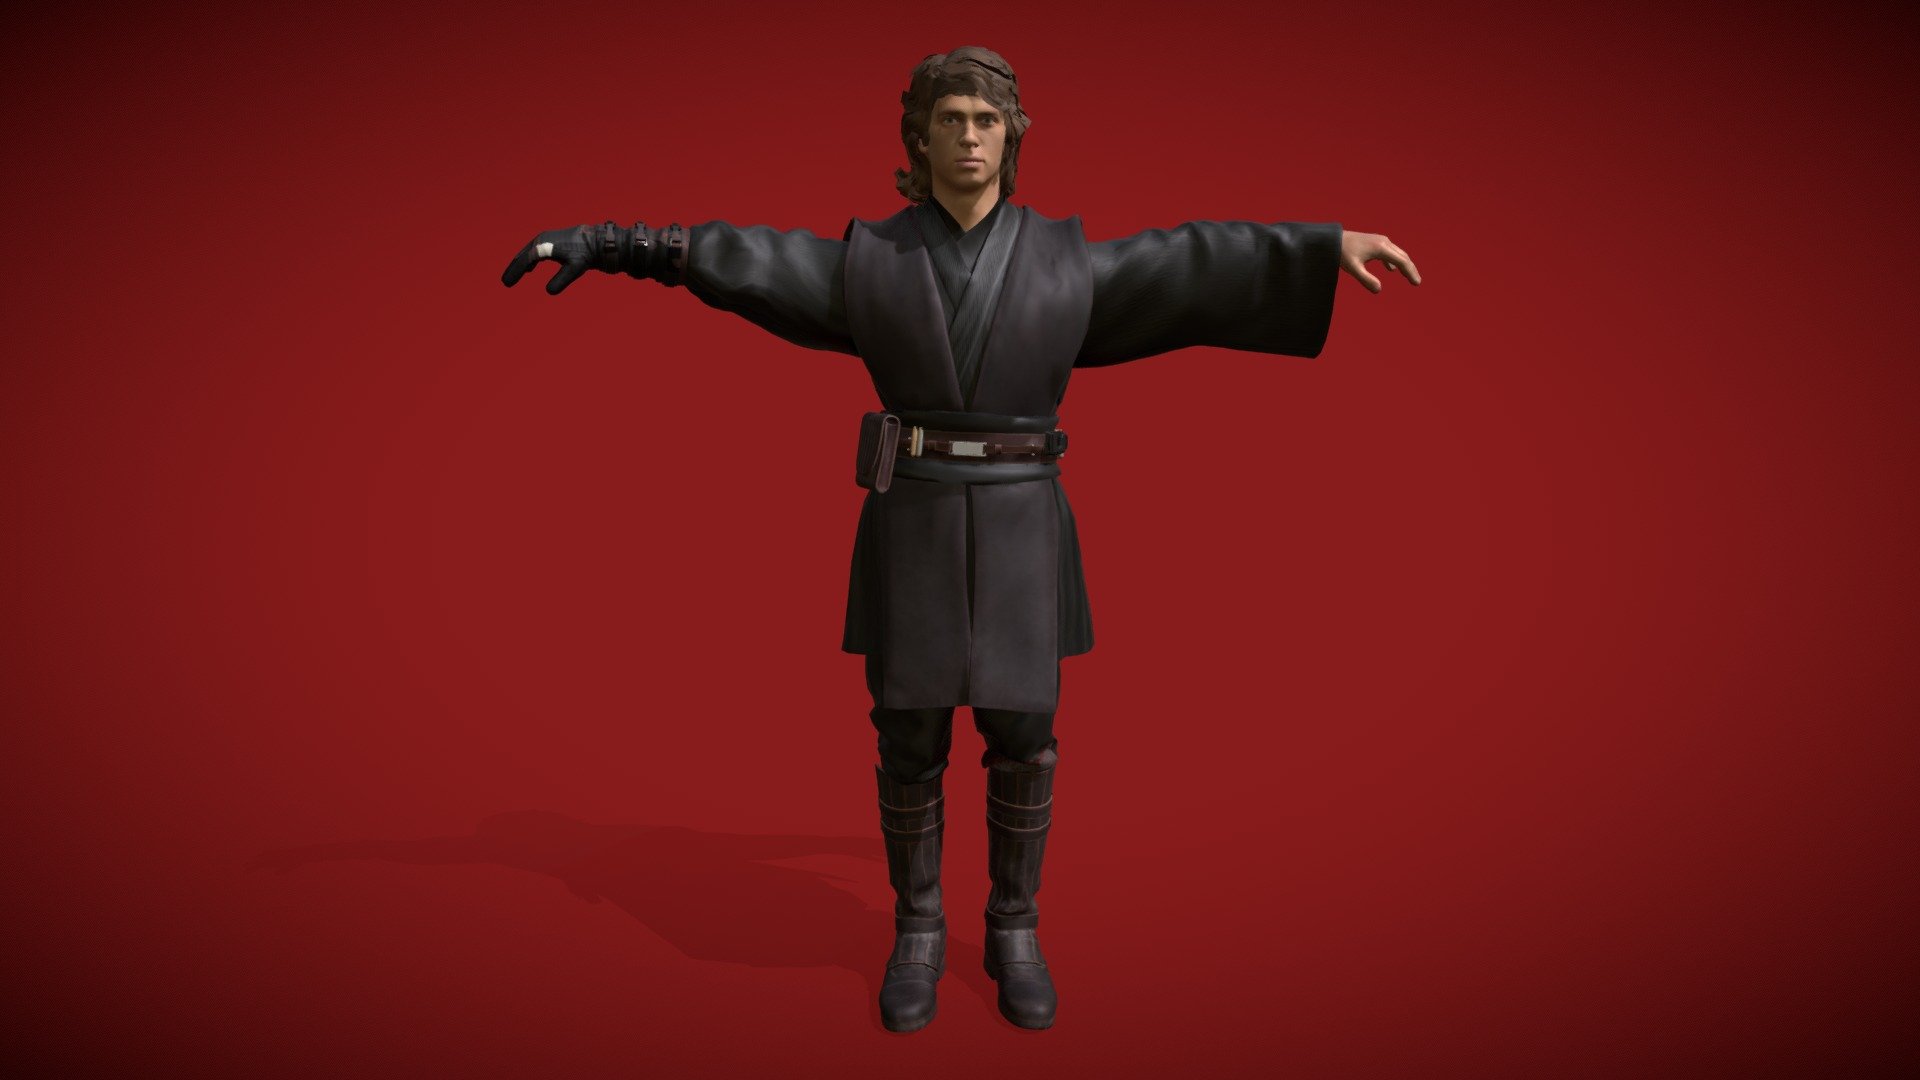 don't forget to like and follow me would like to see more this? let me know in the comment bellow what you want me to do next. Also follow me on my social media 
Instagram- @lil_cj_5888
Facebook - @caleb_jean
SnapChat - caleb5888 - Anakin Skywalker - Buy Royalty Free 3D model by Lil_CJ_5888 3d model